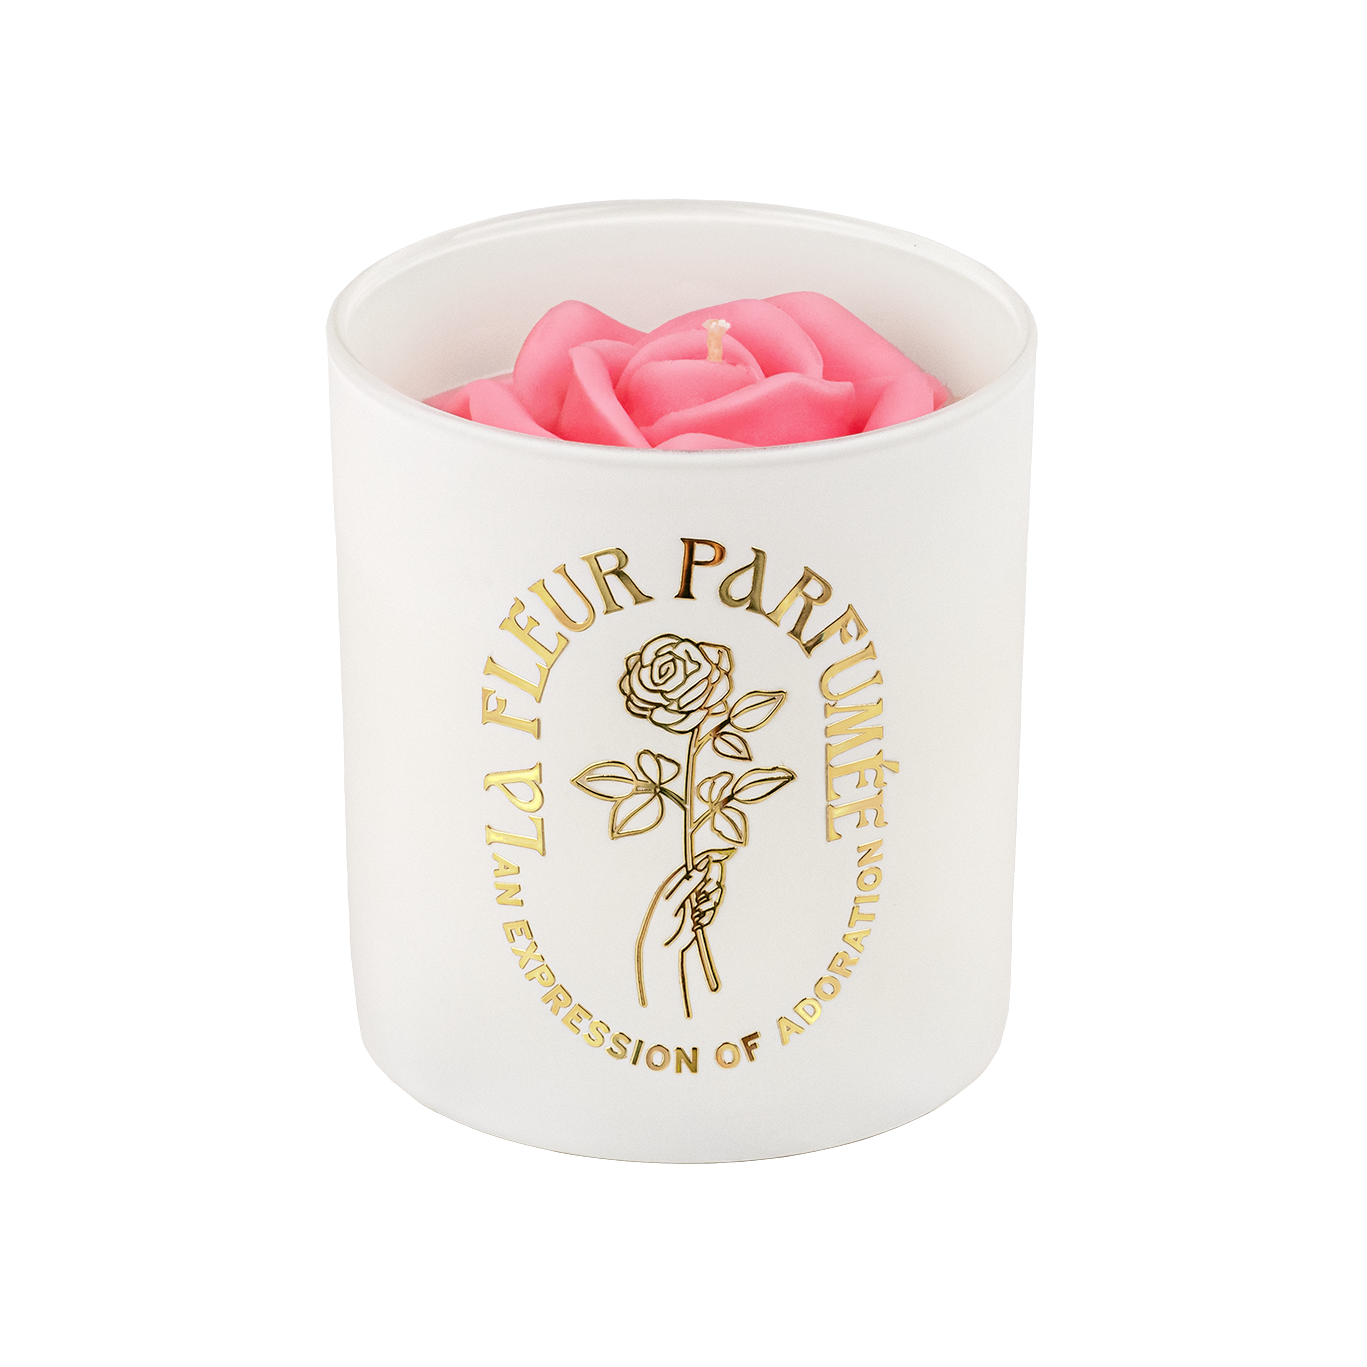 An elegant luxurious ivory white candle with a gold emblem that reads La Fleur Parfumée An Expression of Adoration, and is topped with a light blush pink sculpted wax rose